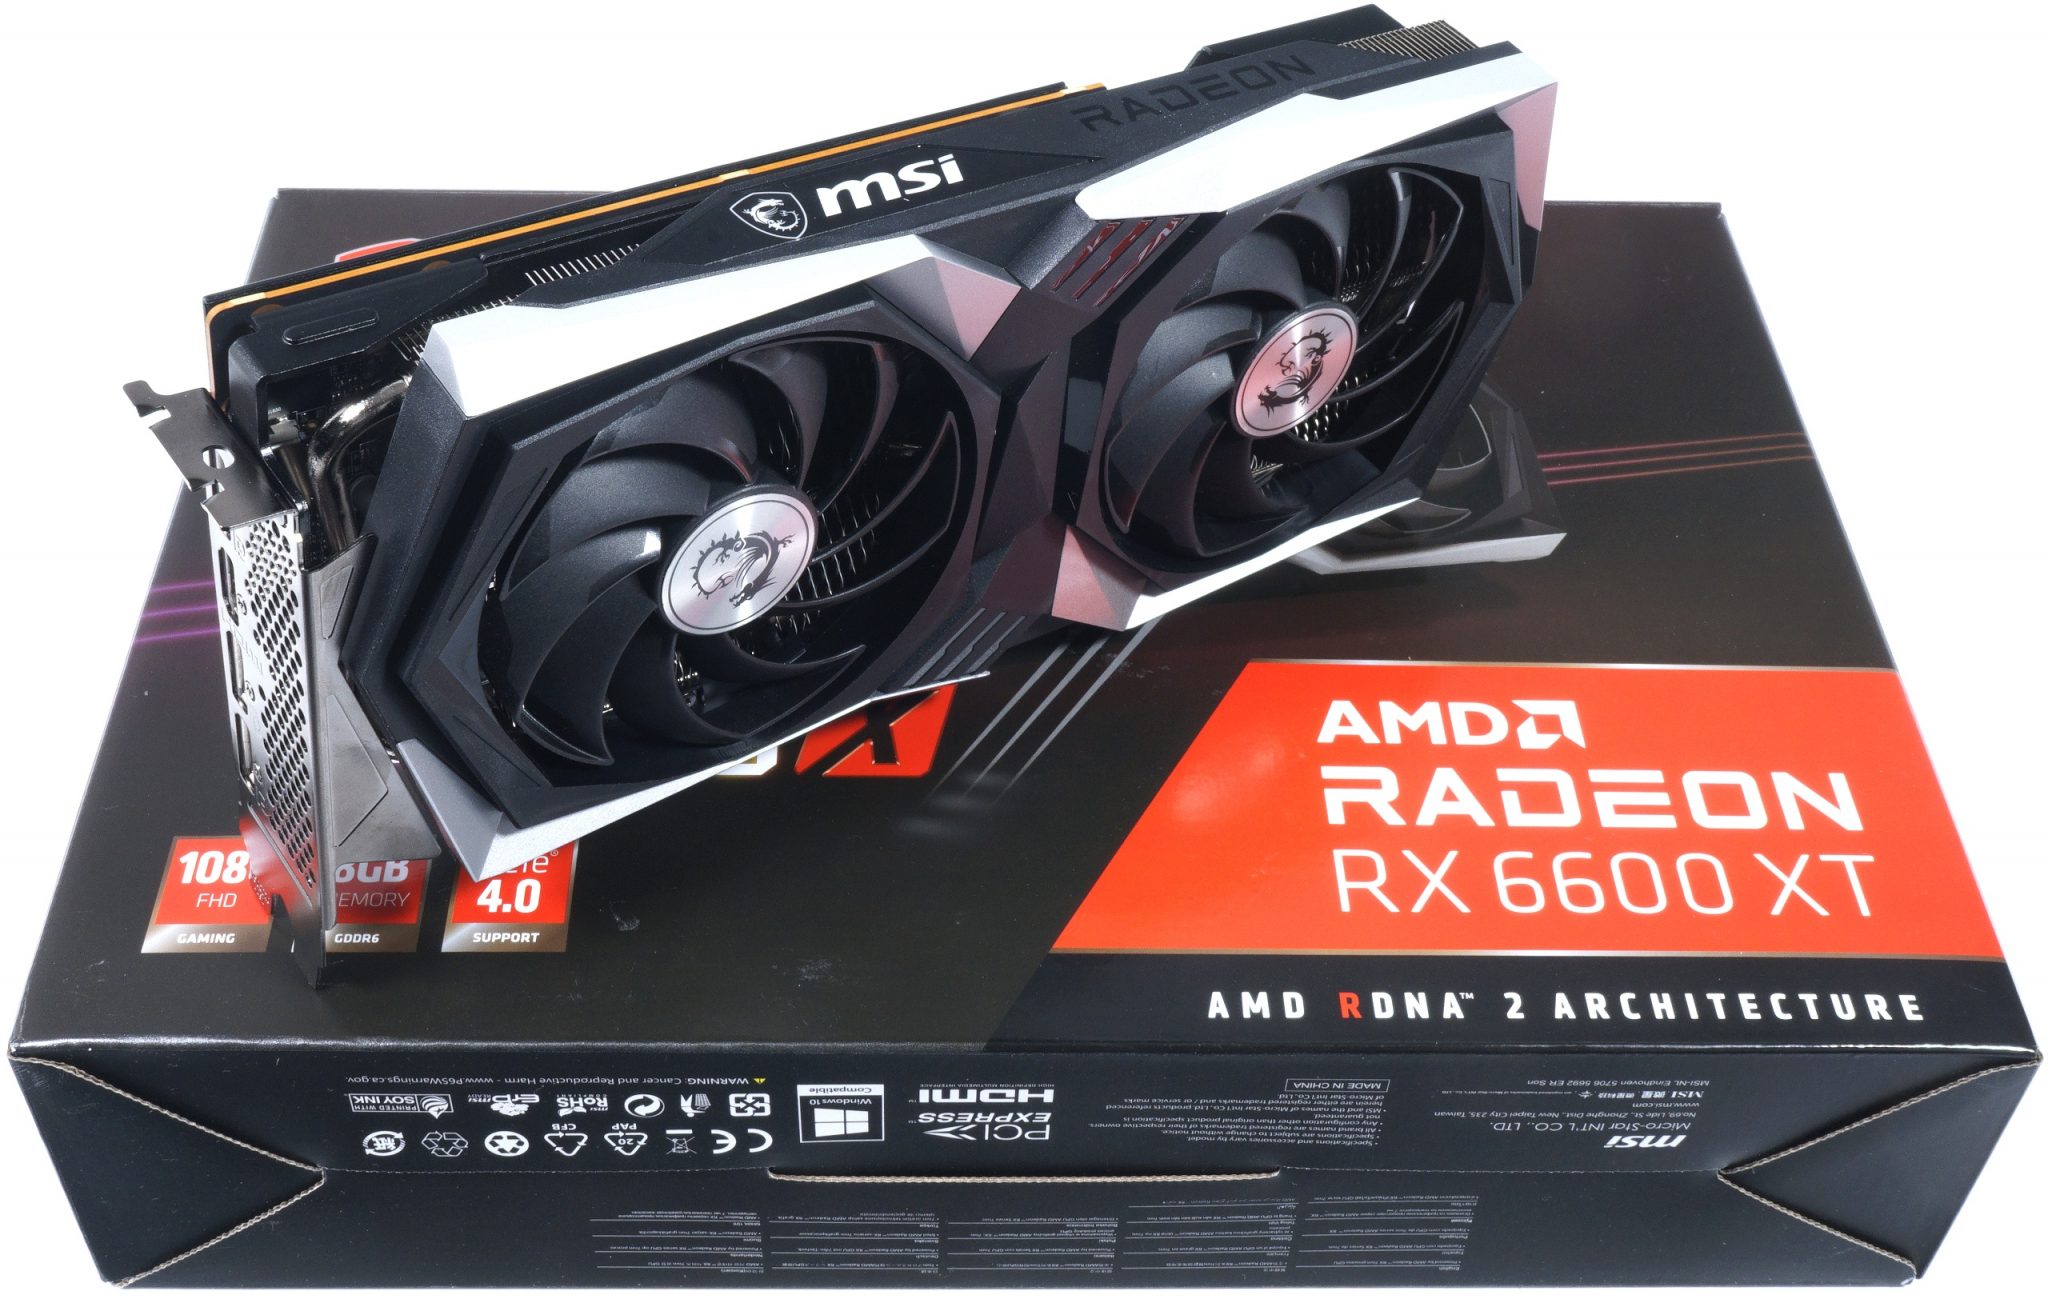 AMD’s Radeon RX 6600XT maximum overclock - with over 2.8 GHz into the